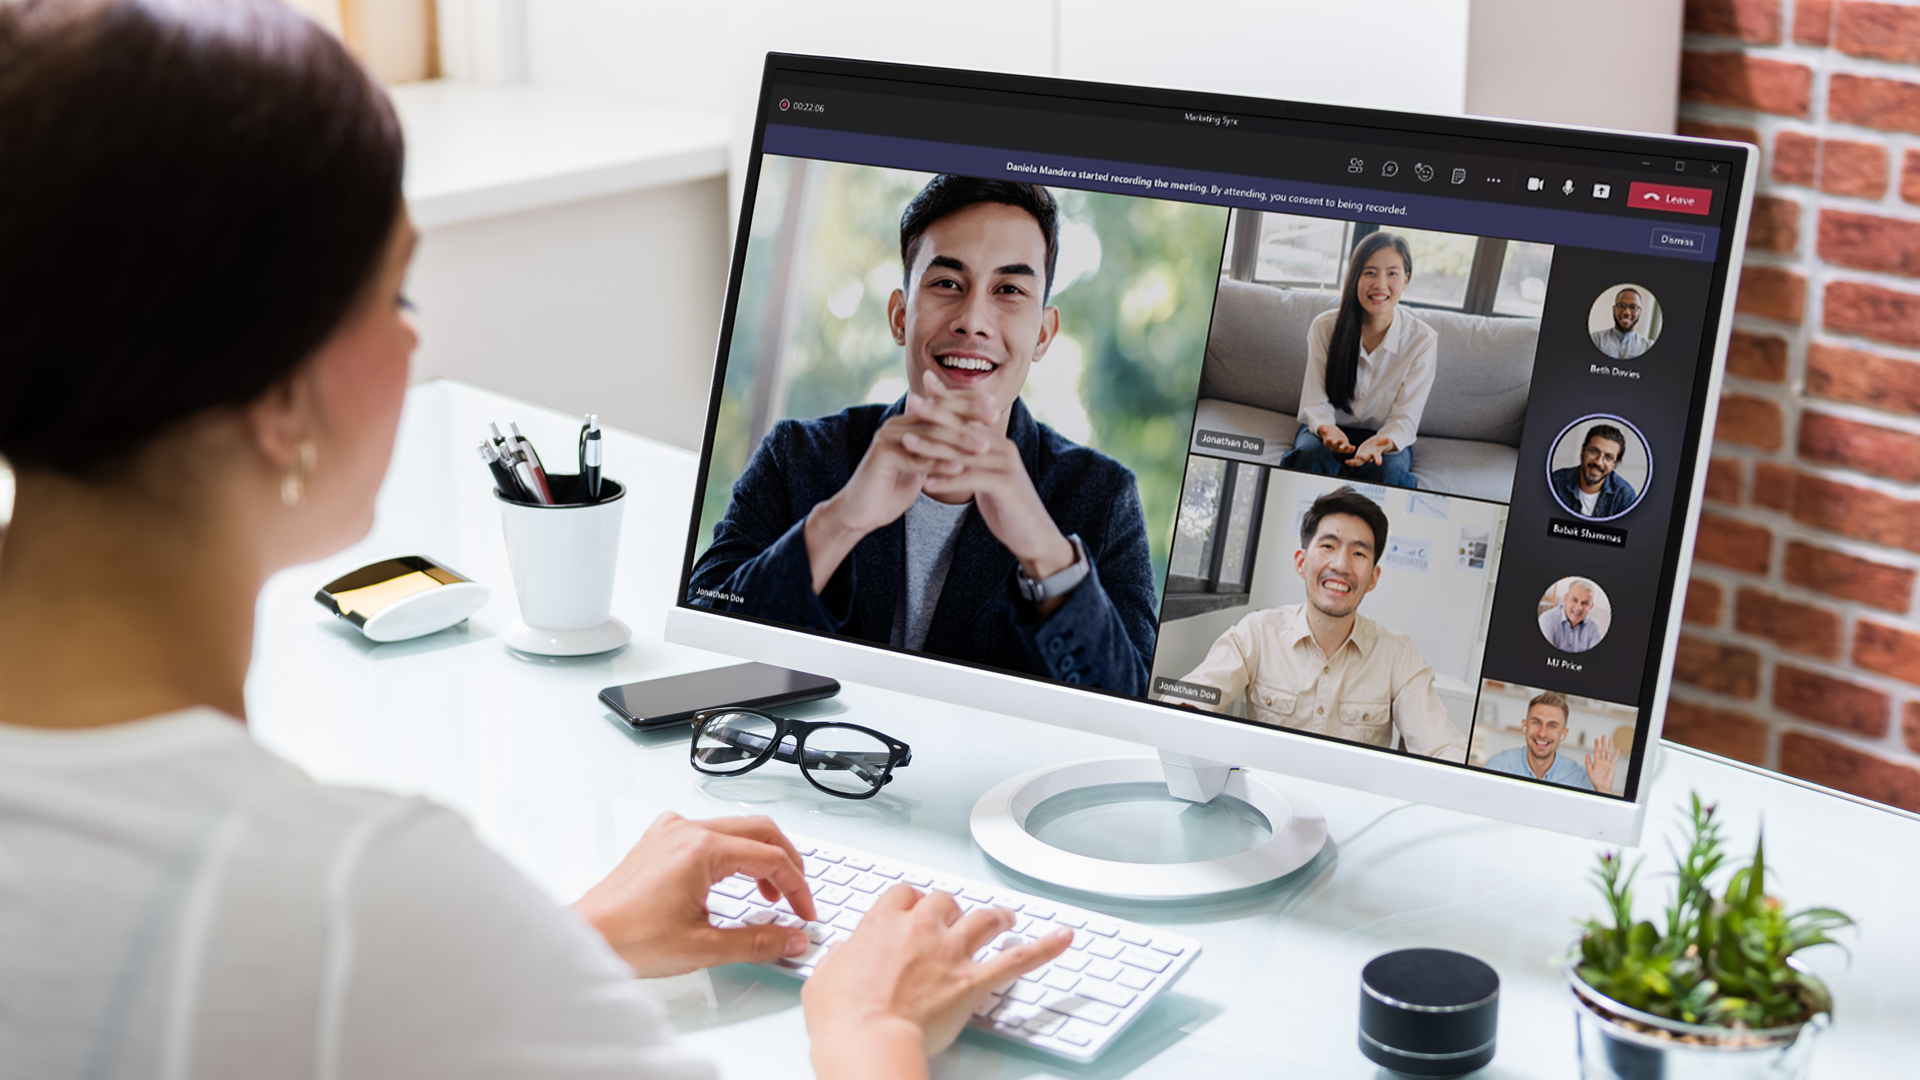 https://www.clinkitsolutions.com/the-ultimate-guide-to-microsoft-teams-meetings/